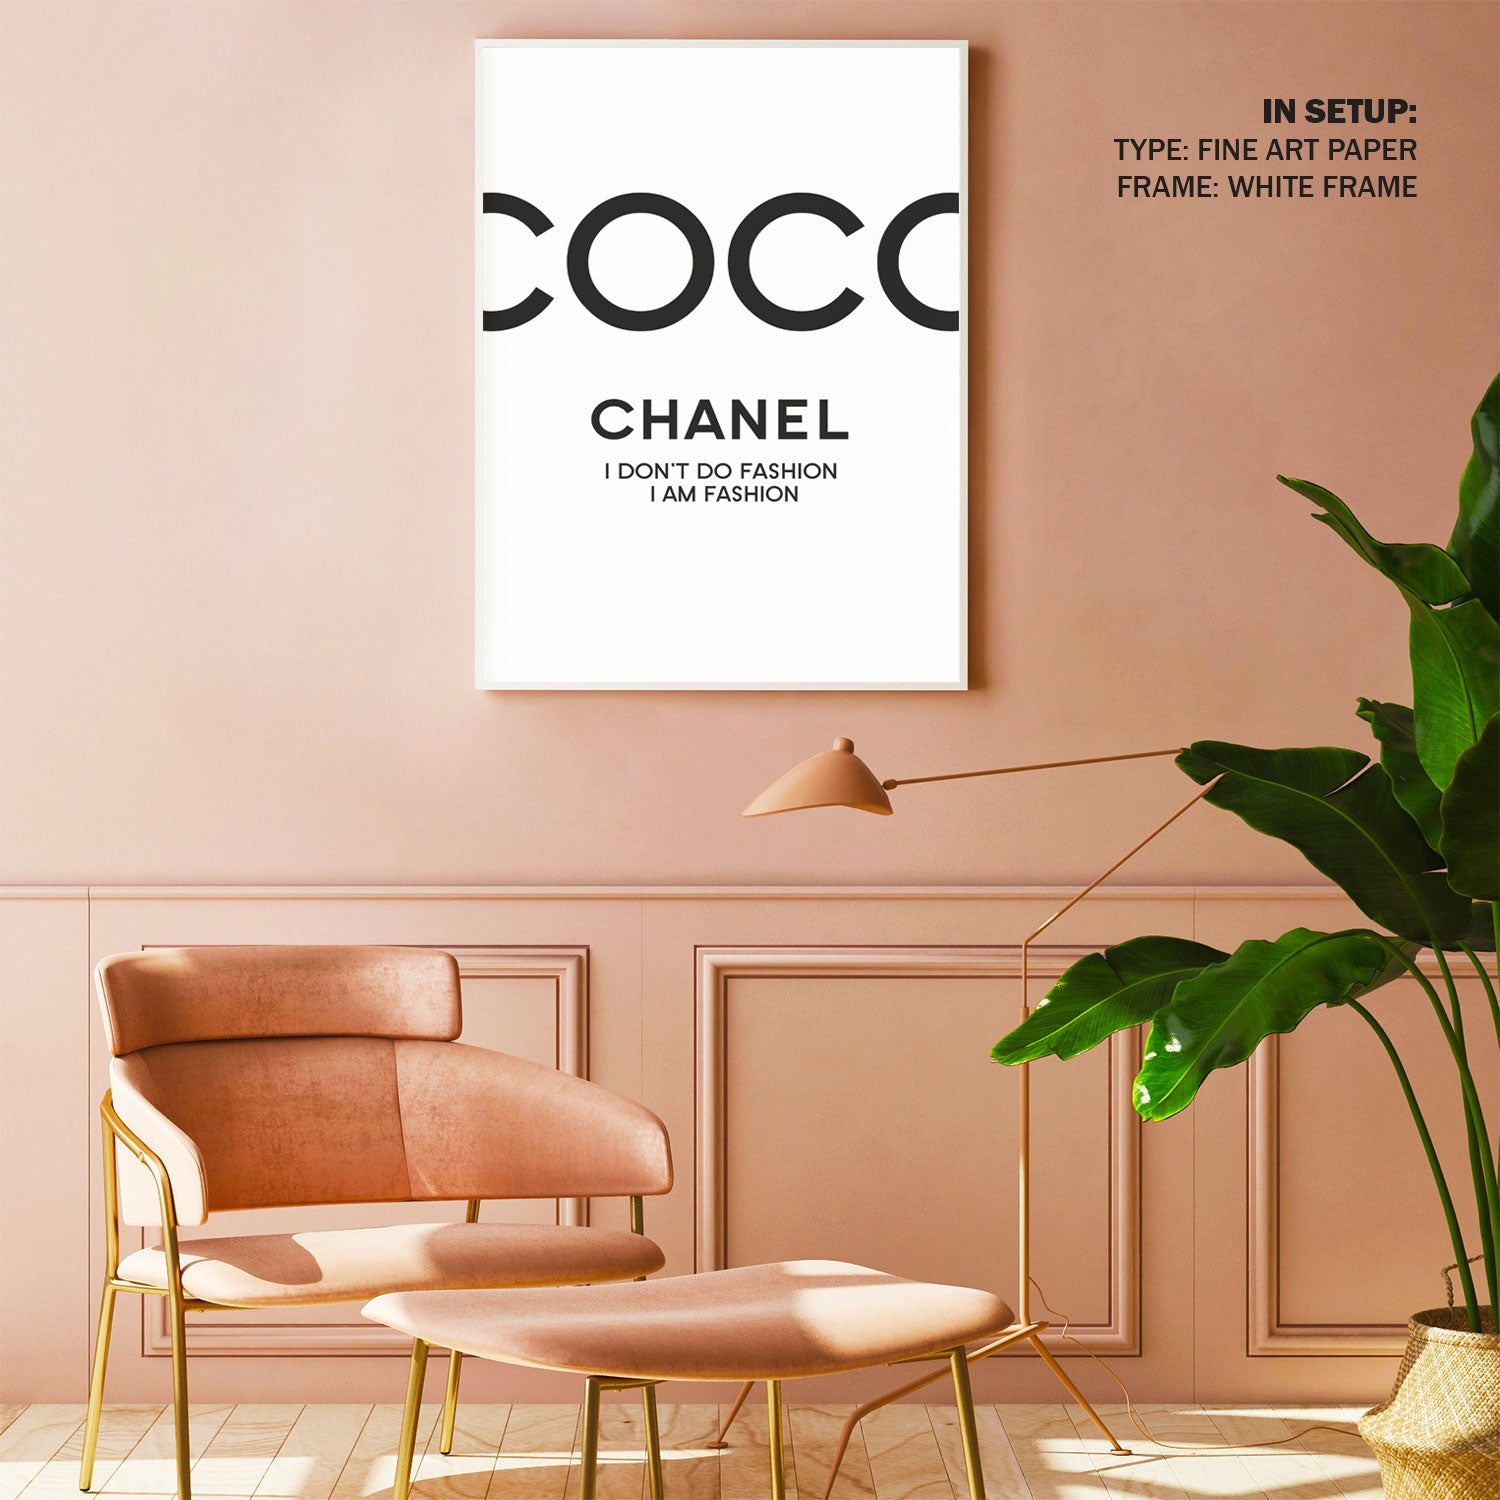 Classical gallery wall vintage posters Coco Chanel poster golden frames